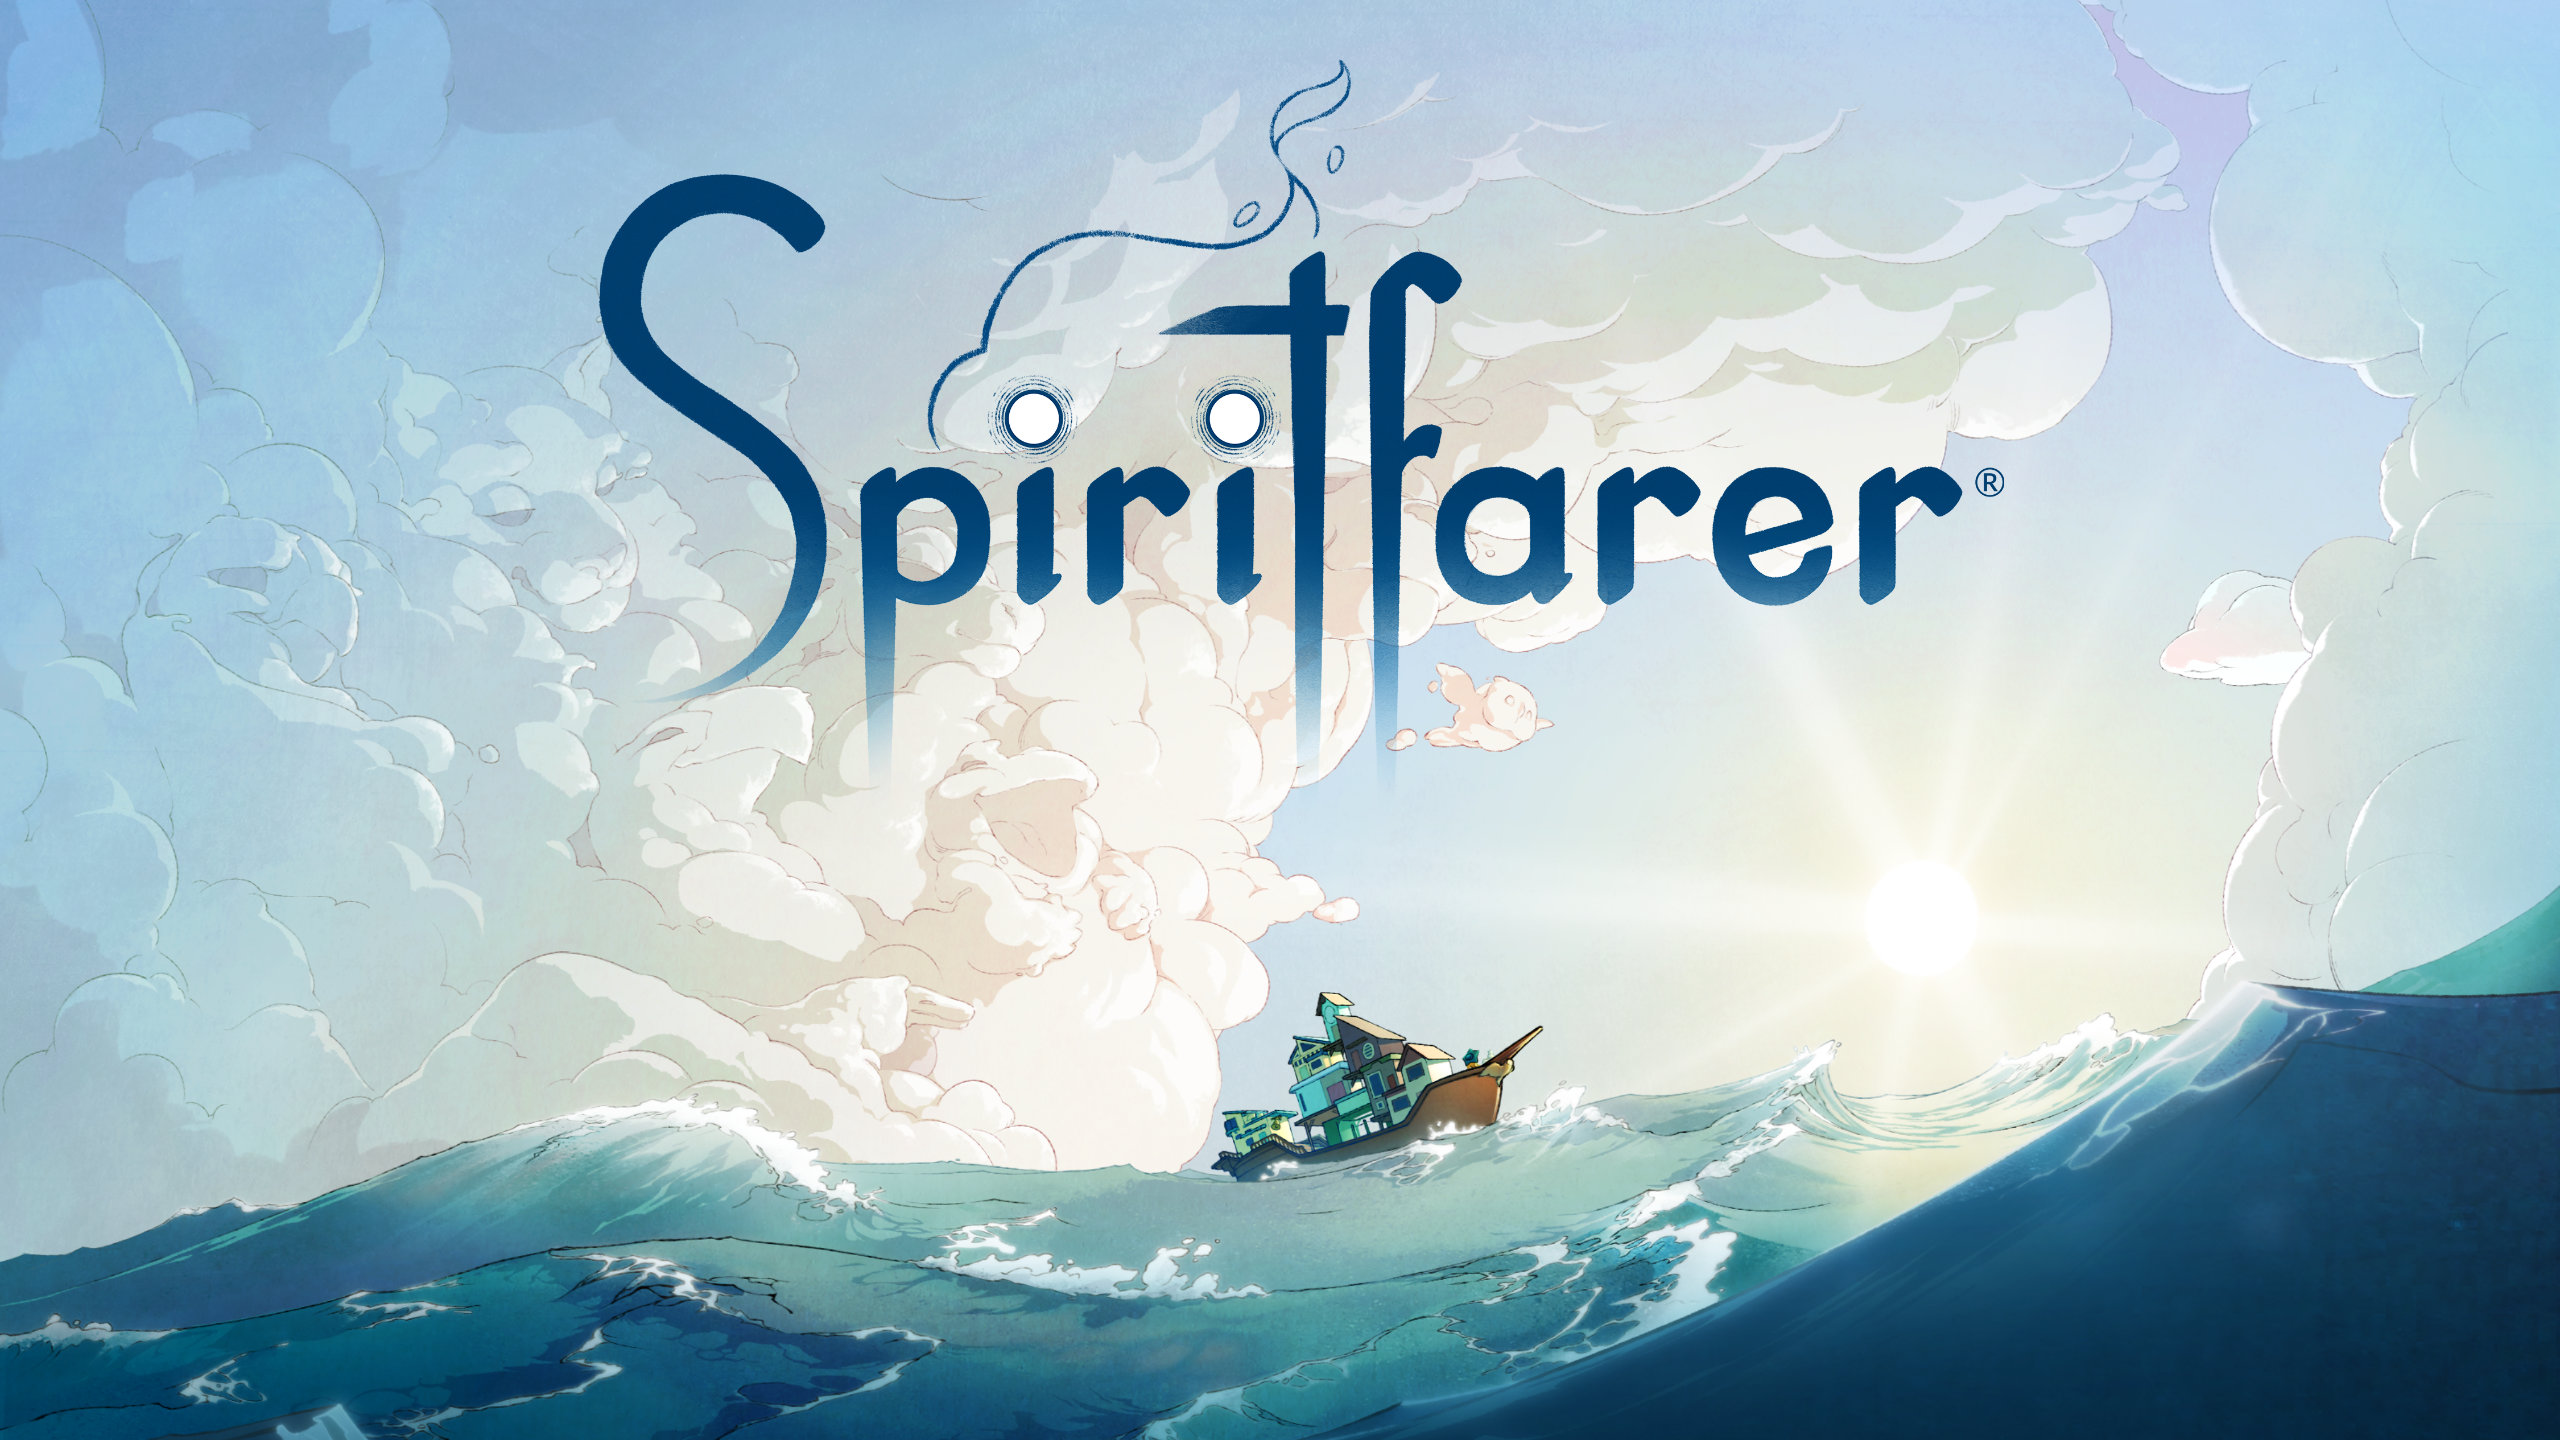 The logo for Spiritfarer above a boat set on choppy blue and white waves.